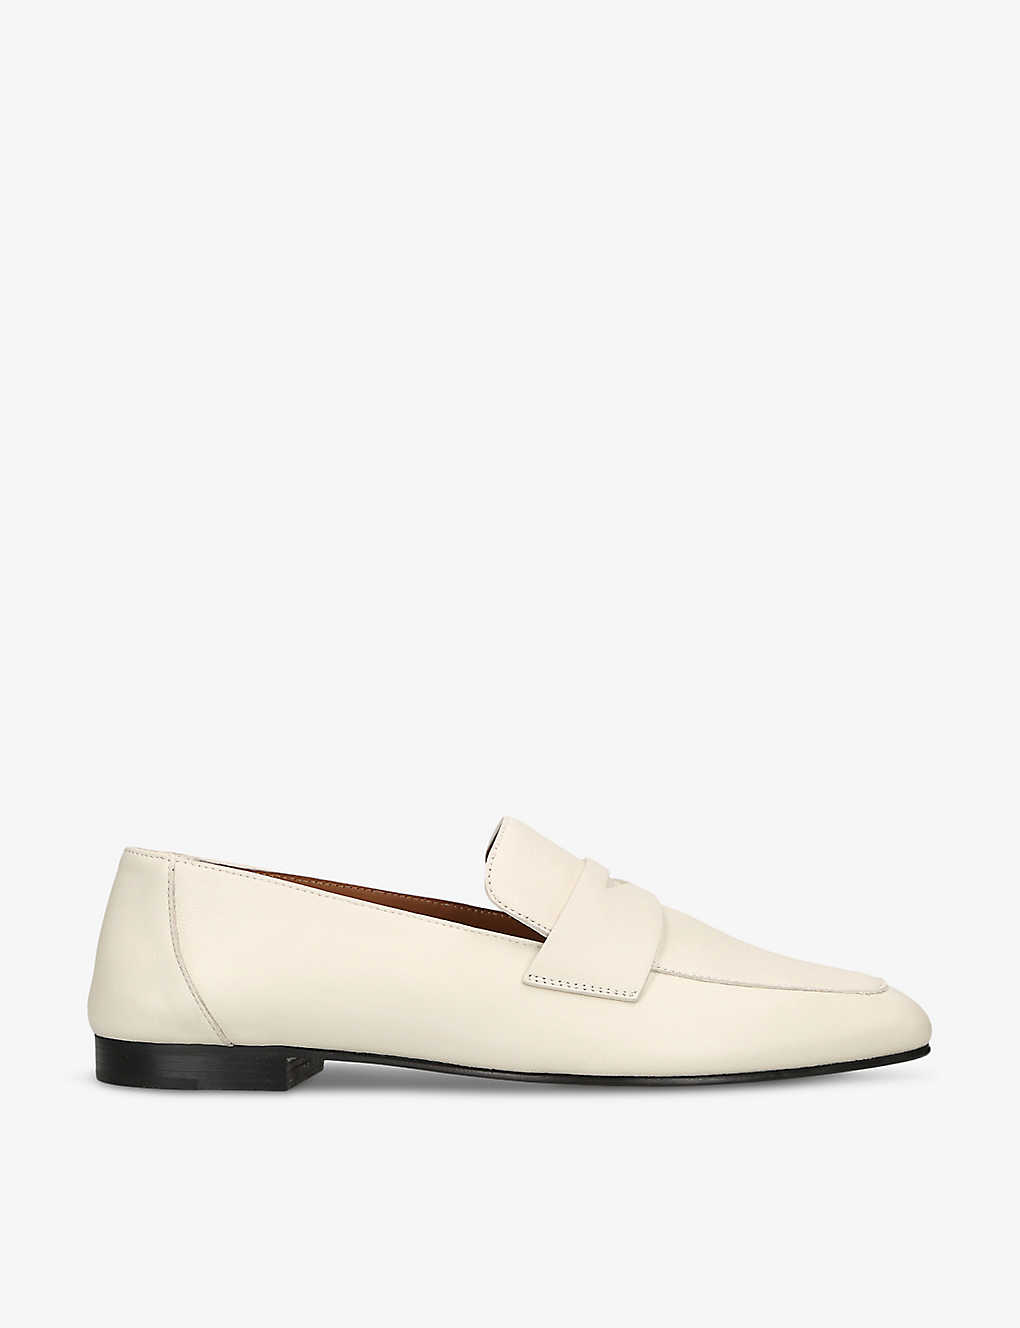 Le Monde Beryl Leather Penny Loafers In White